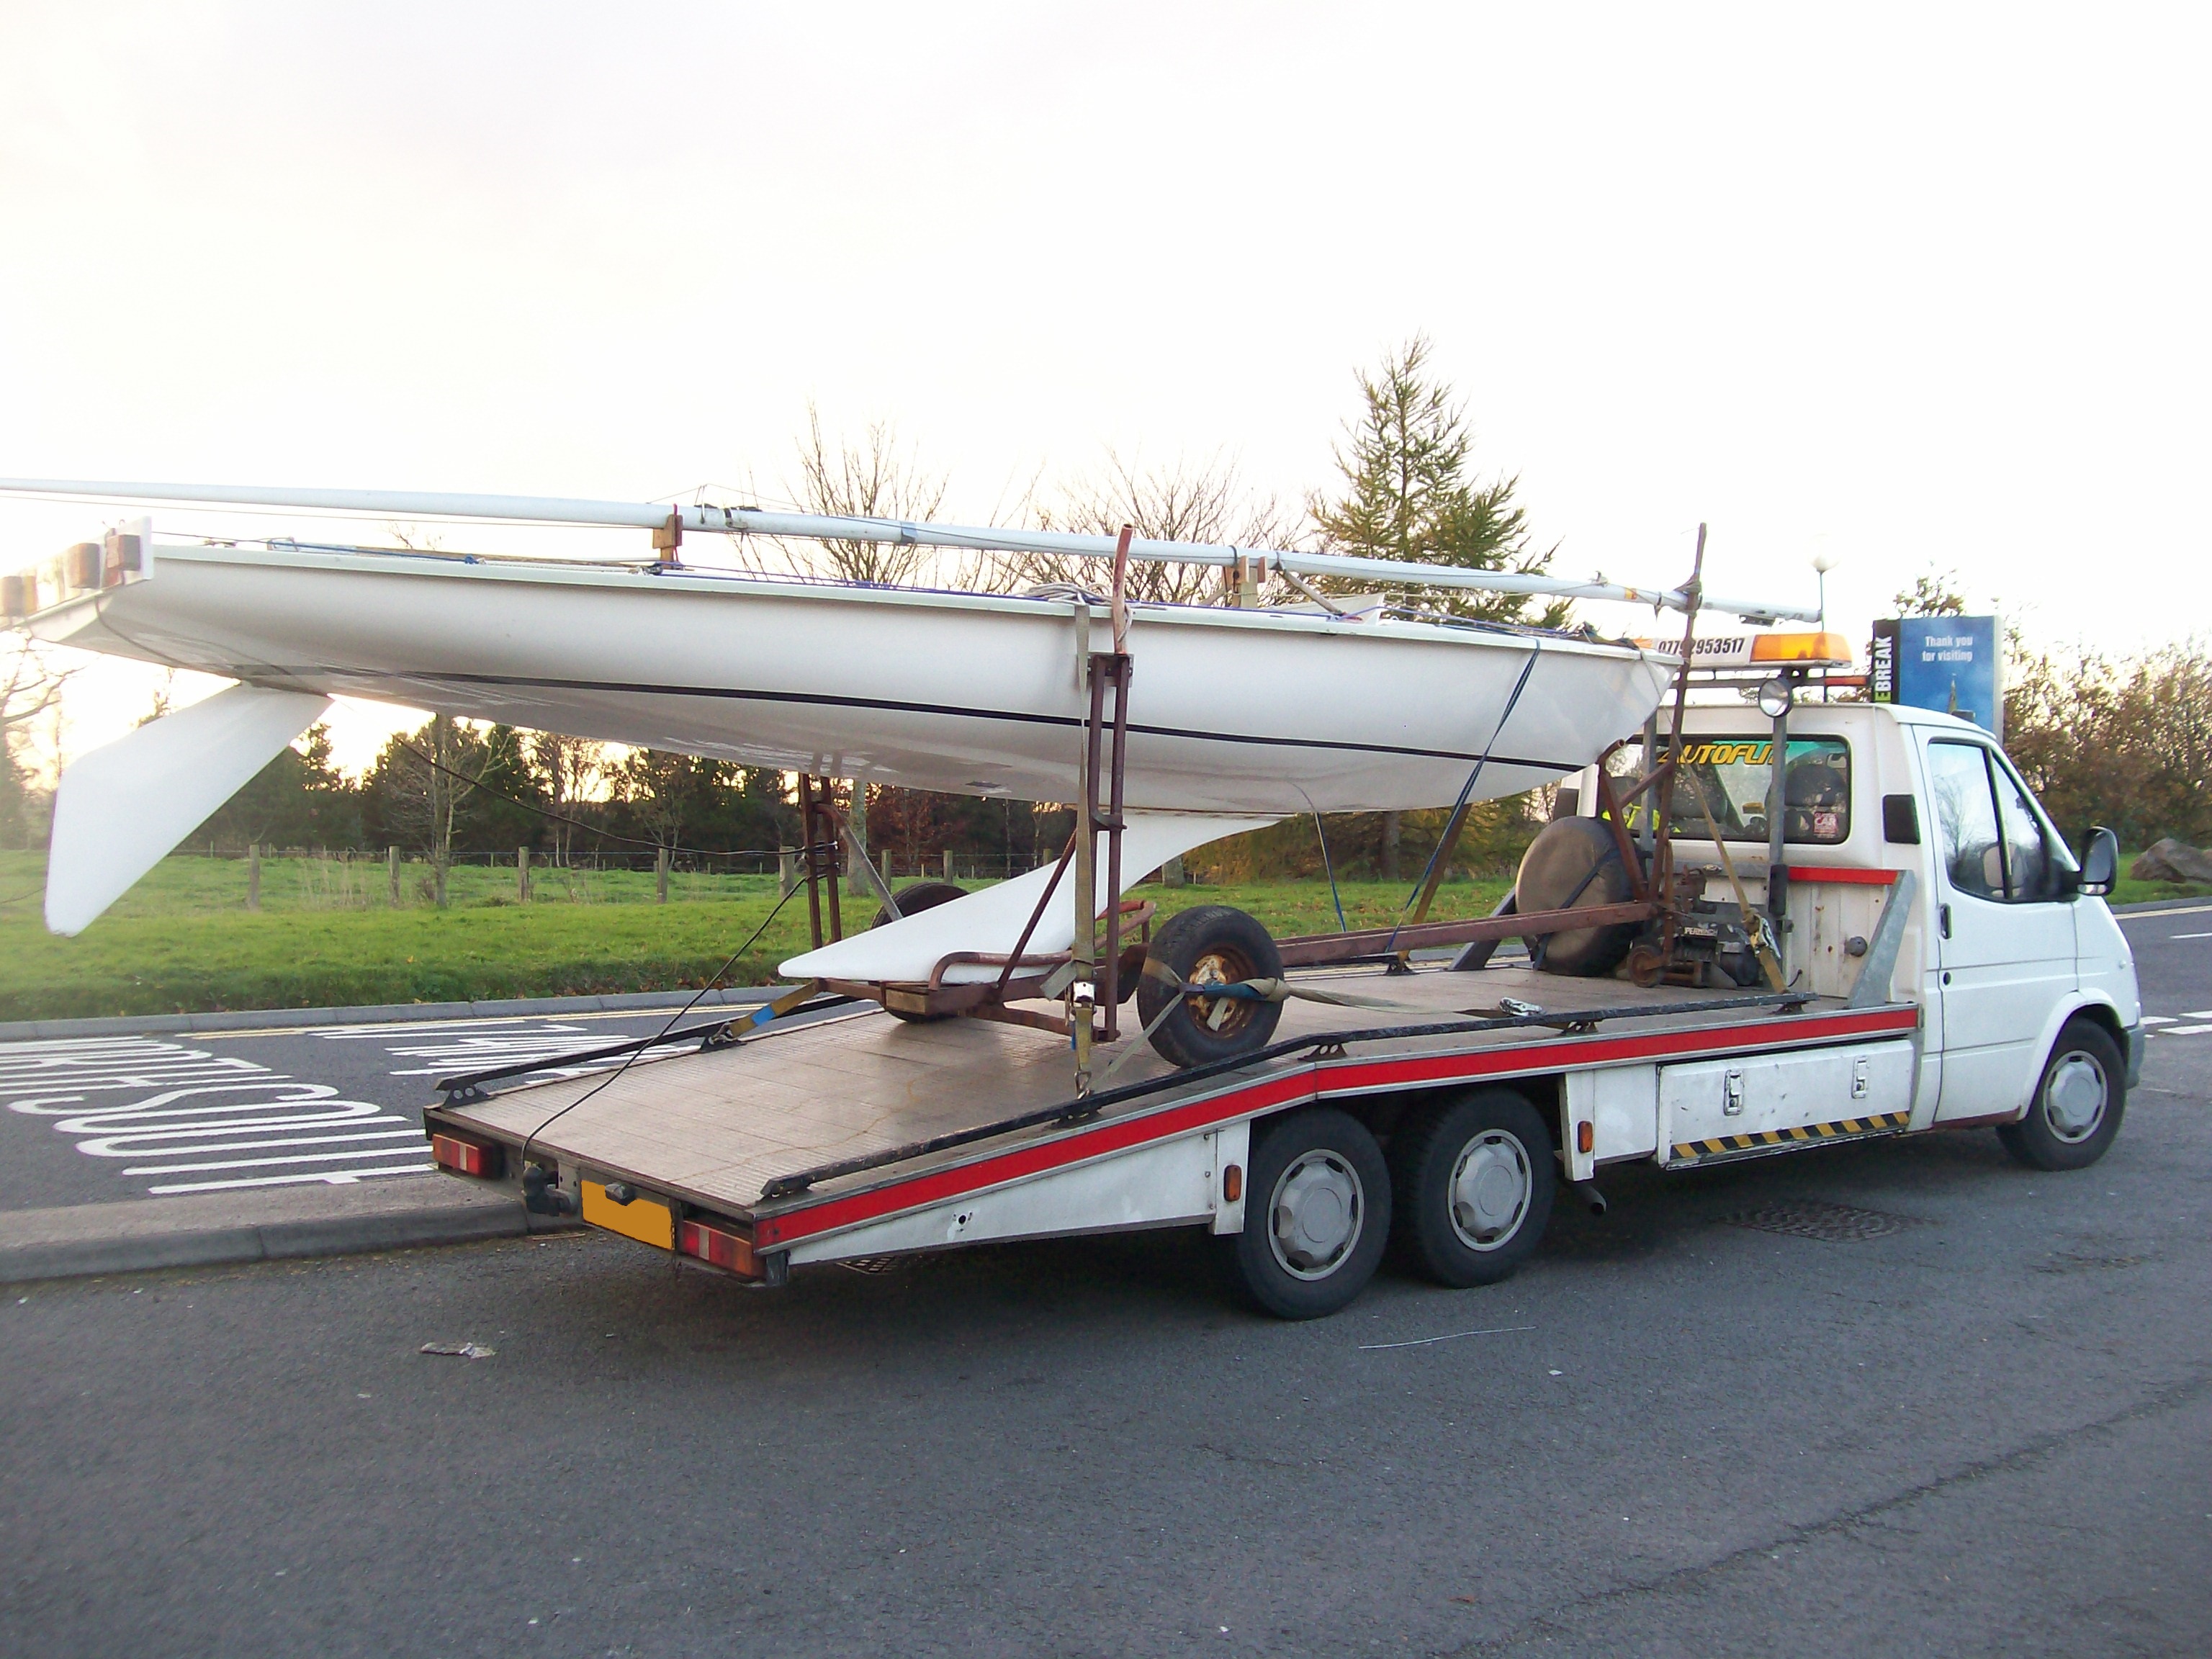 20ft Racing Dinghy on the back of the Autoflit Transporter